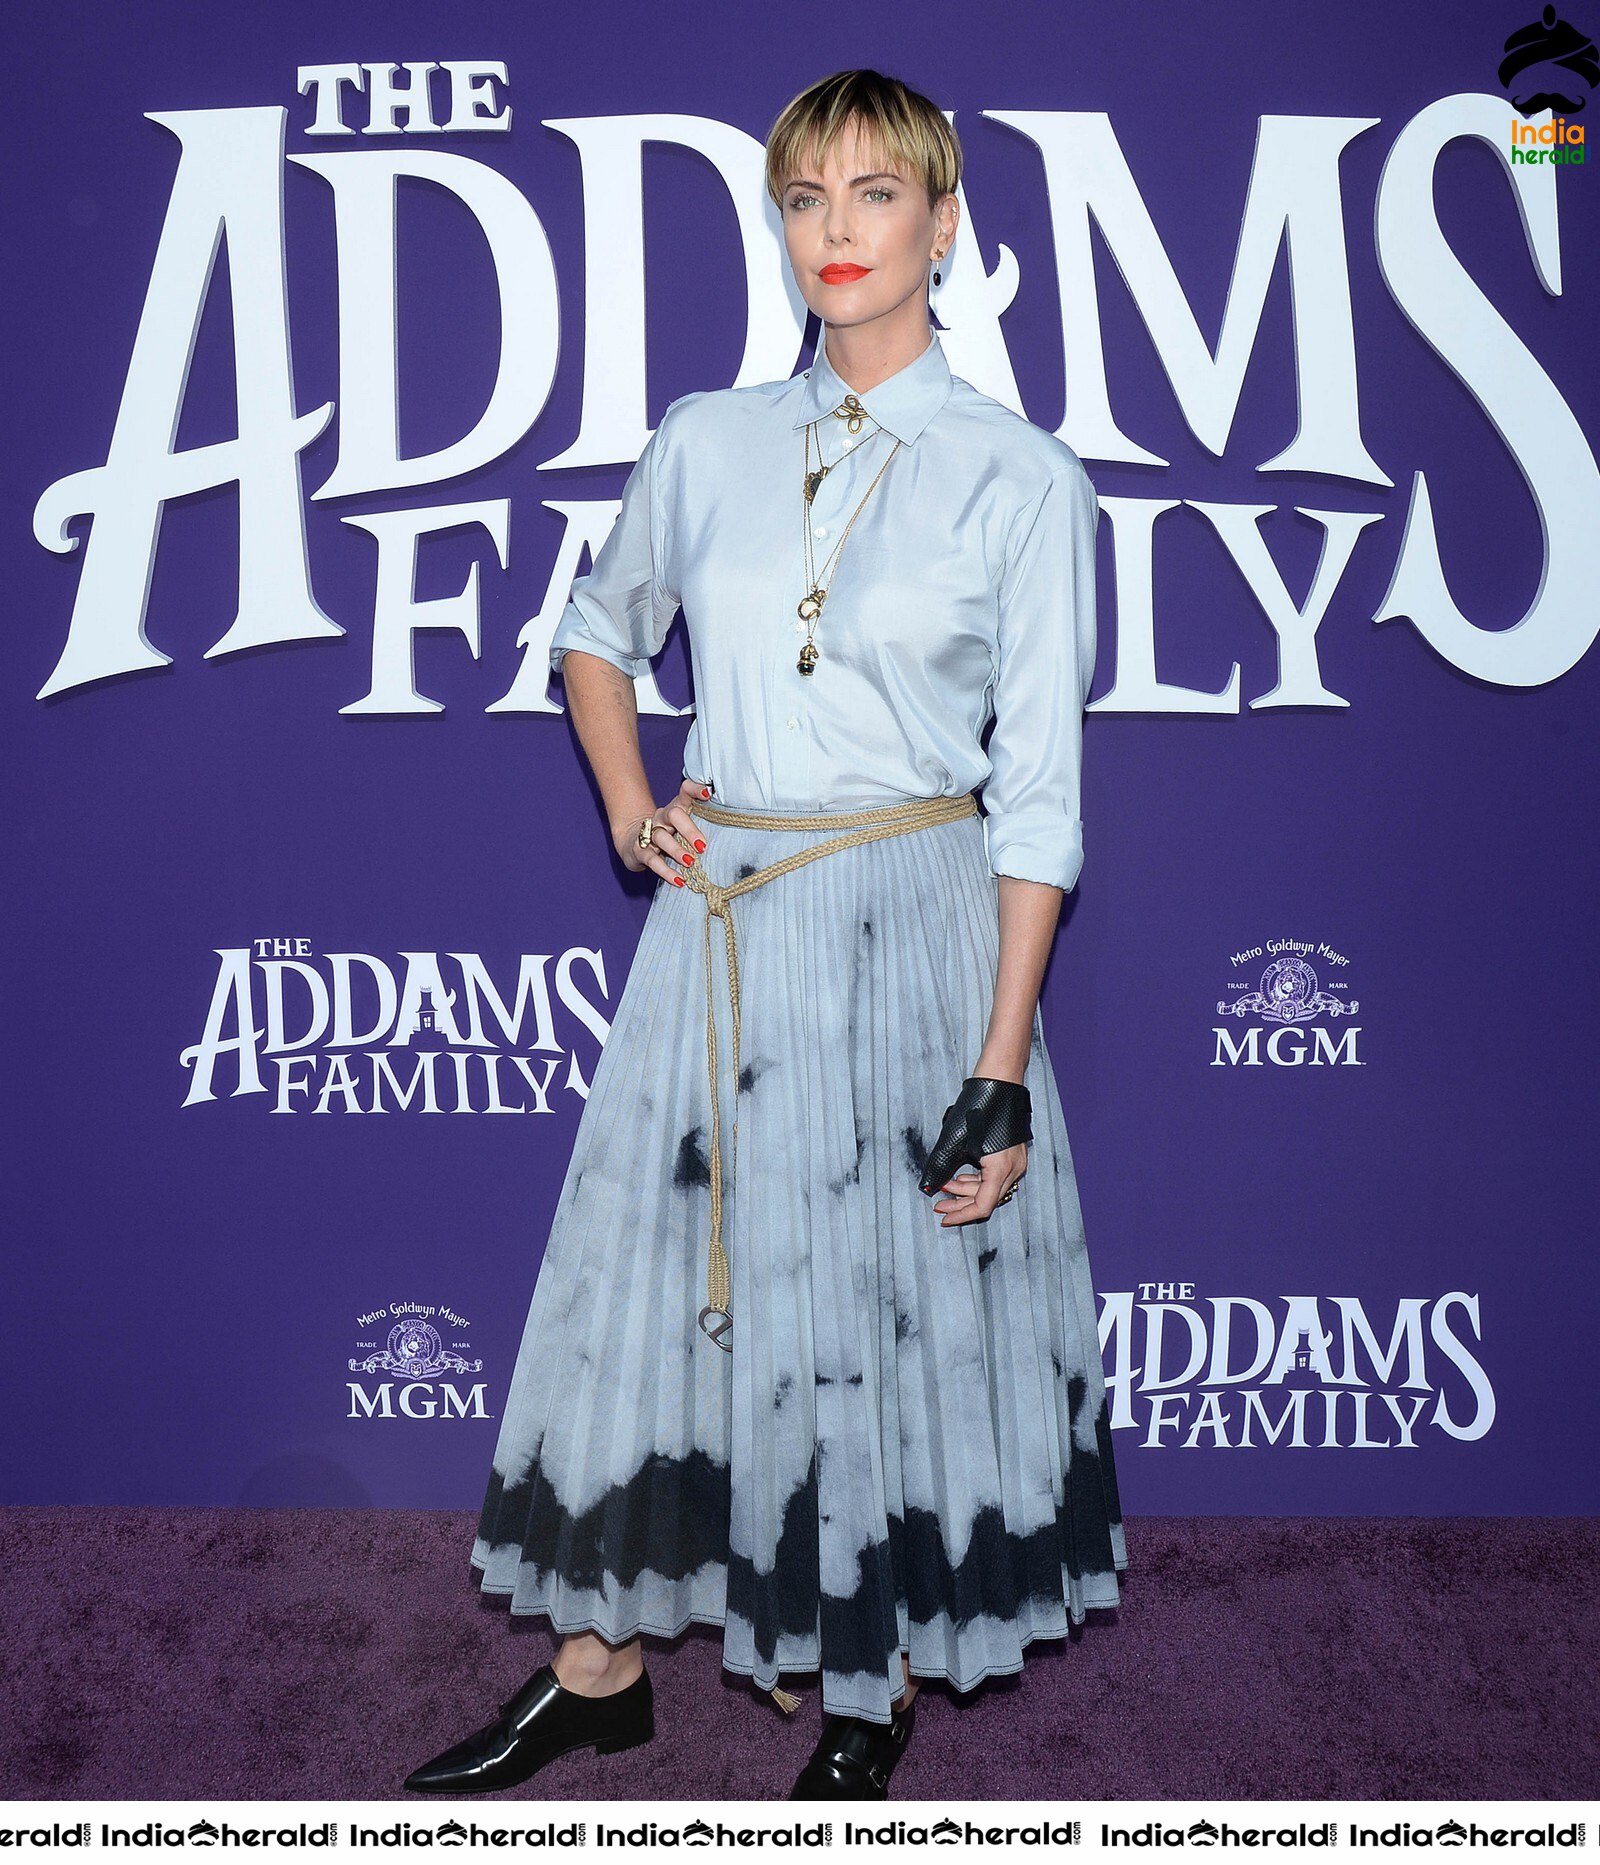 Charlize Theron in The Addams Family Premiere in Century City